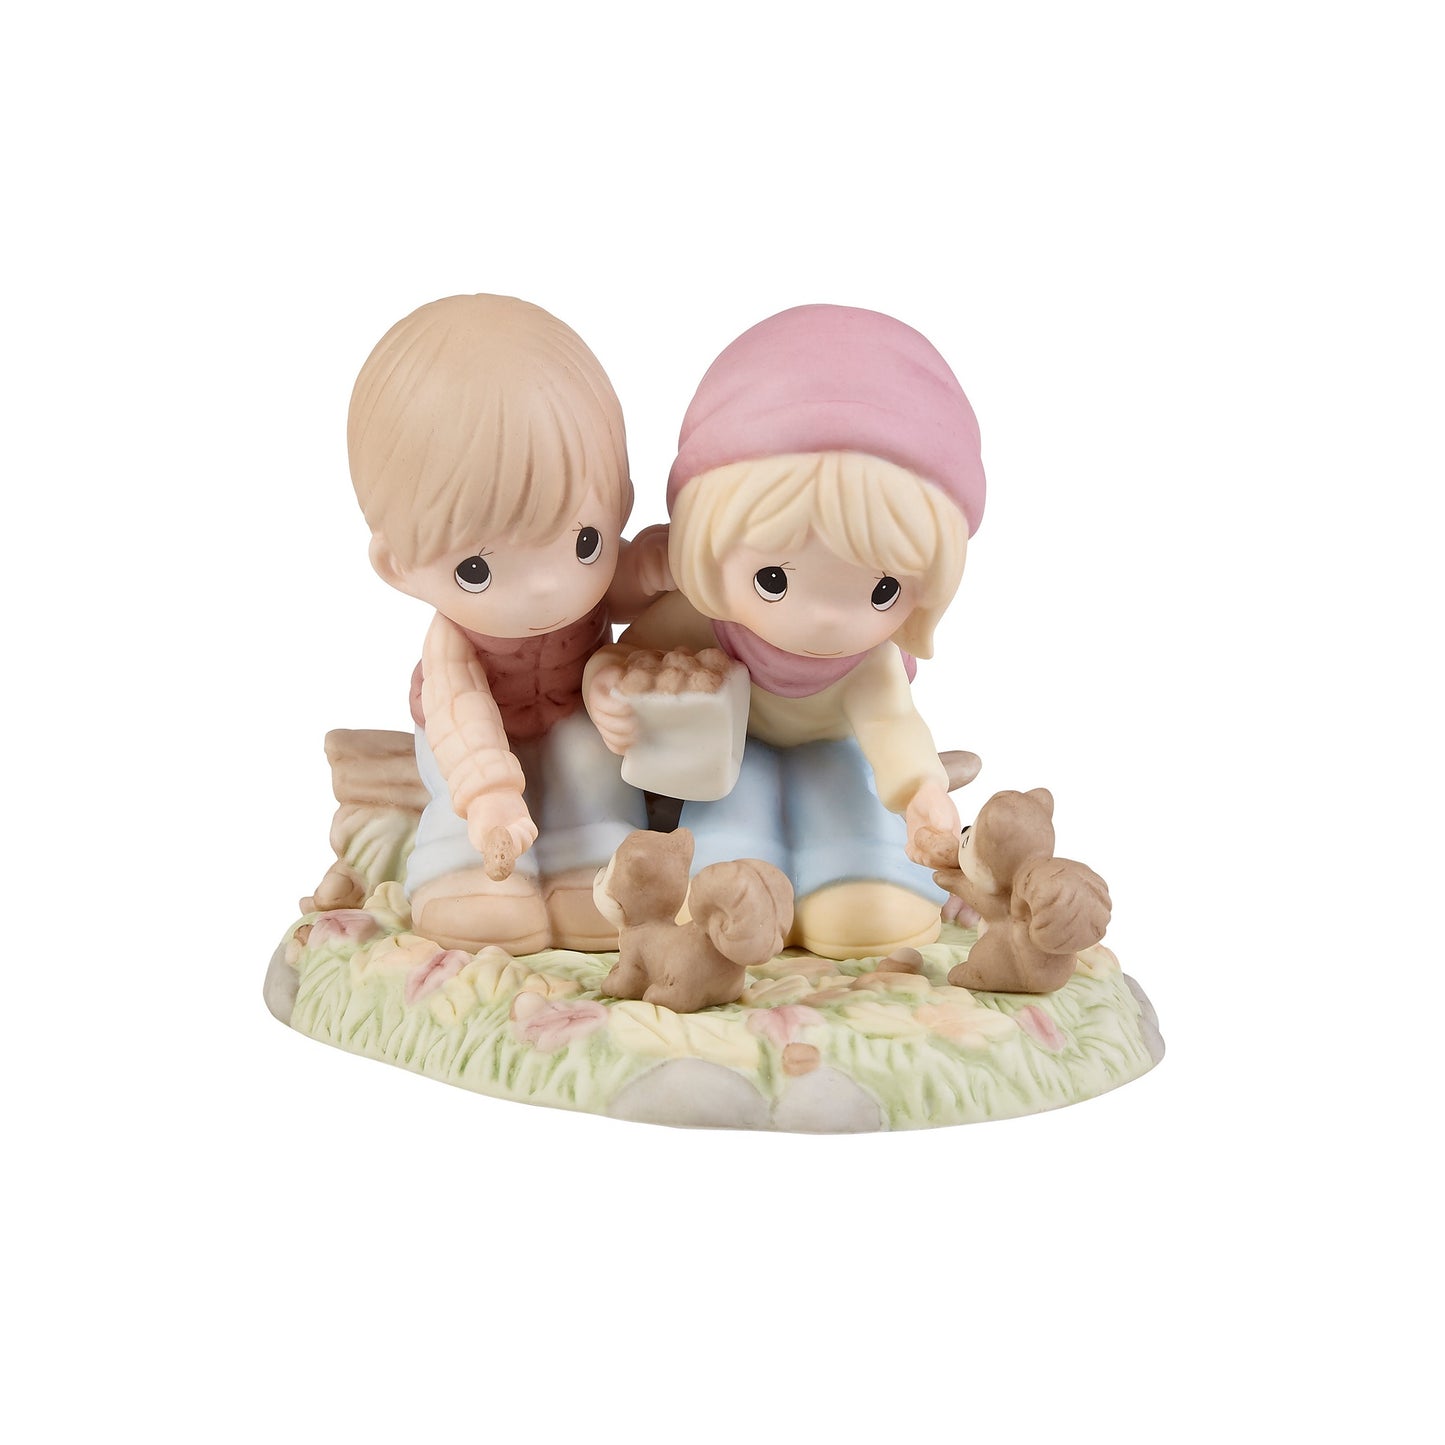 I'm Nuts About You Figurine by Precious Moments